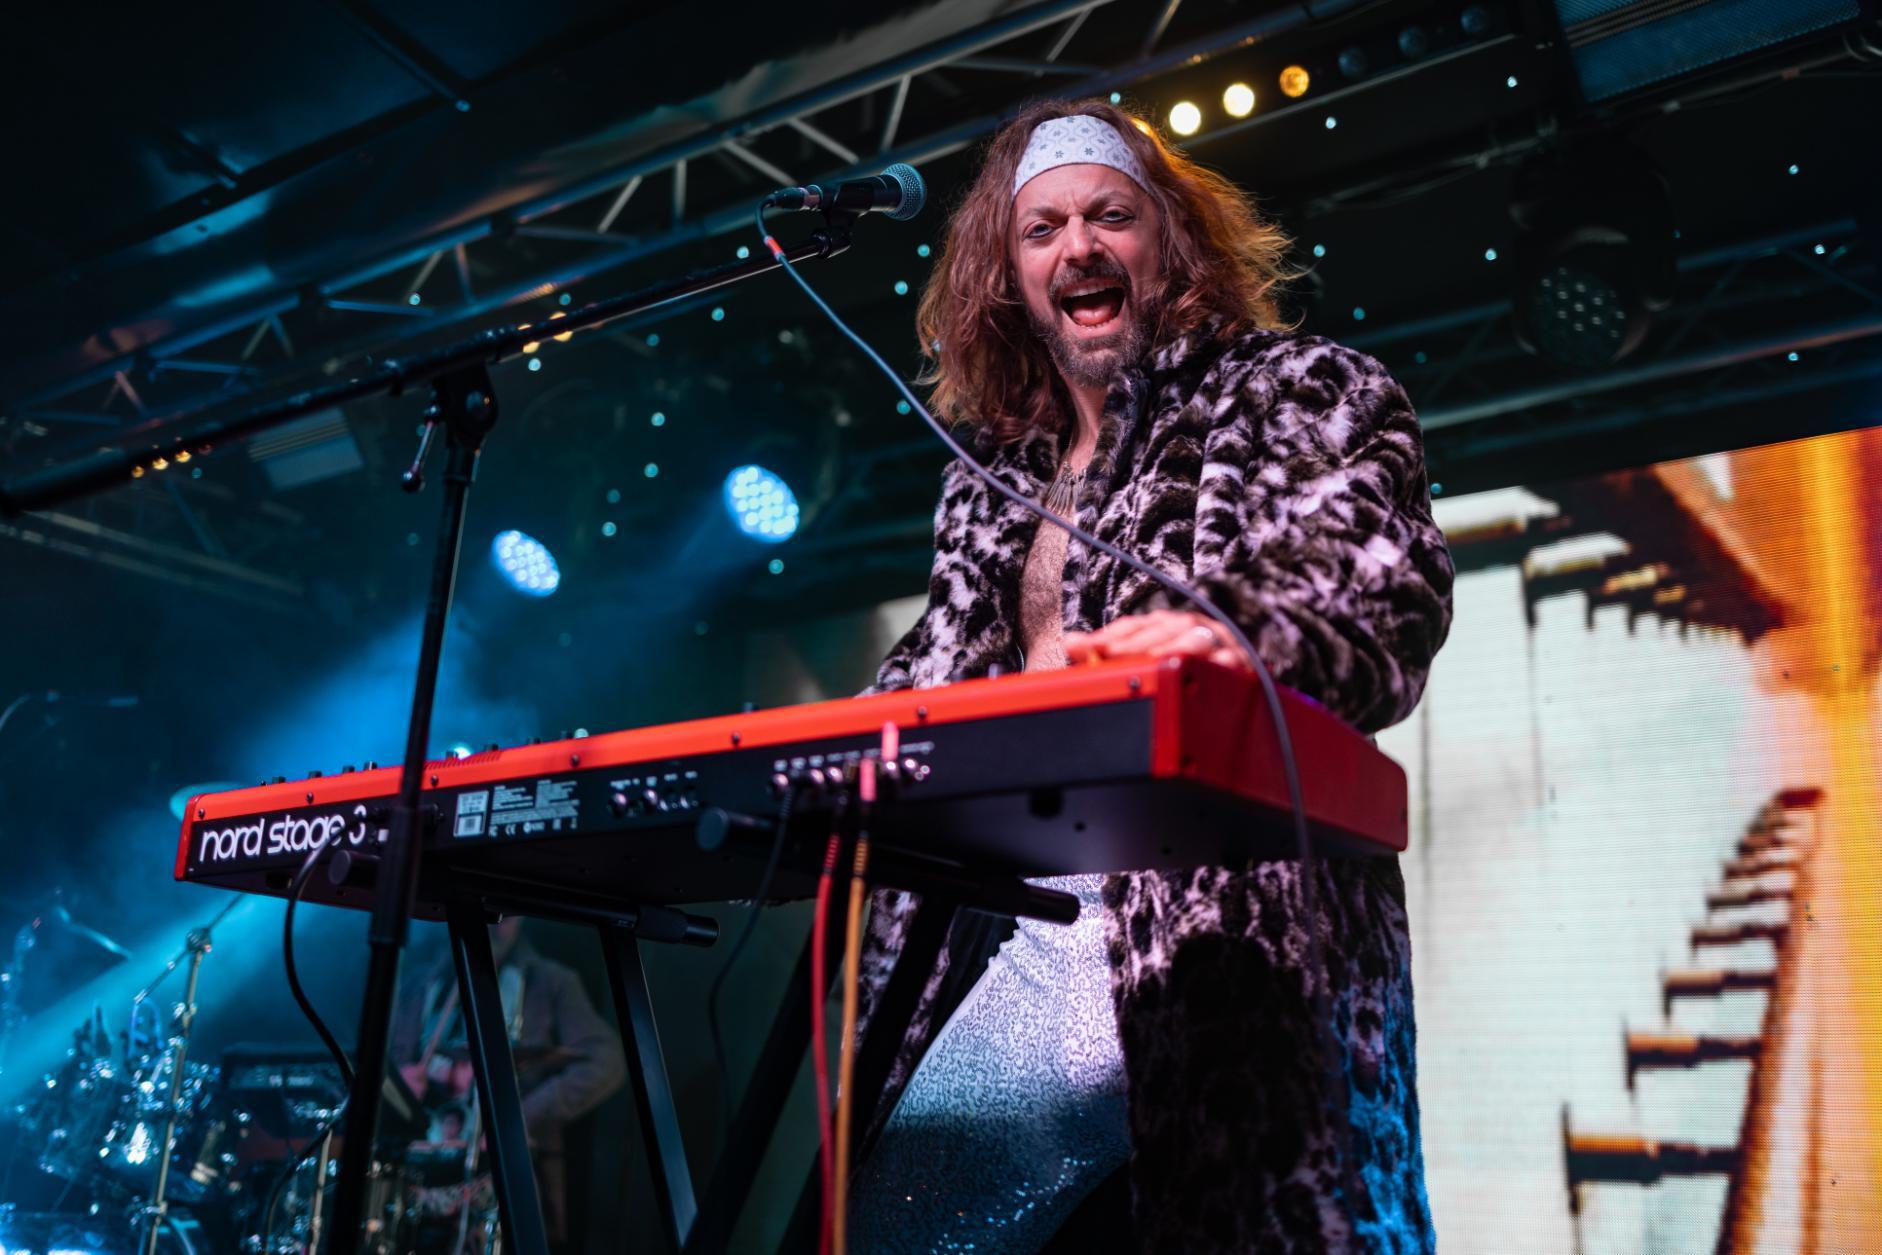 Man playing keyboard and singing with headband and long furry coat